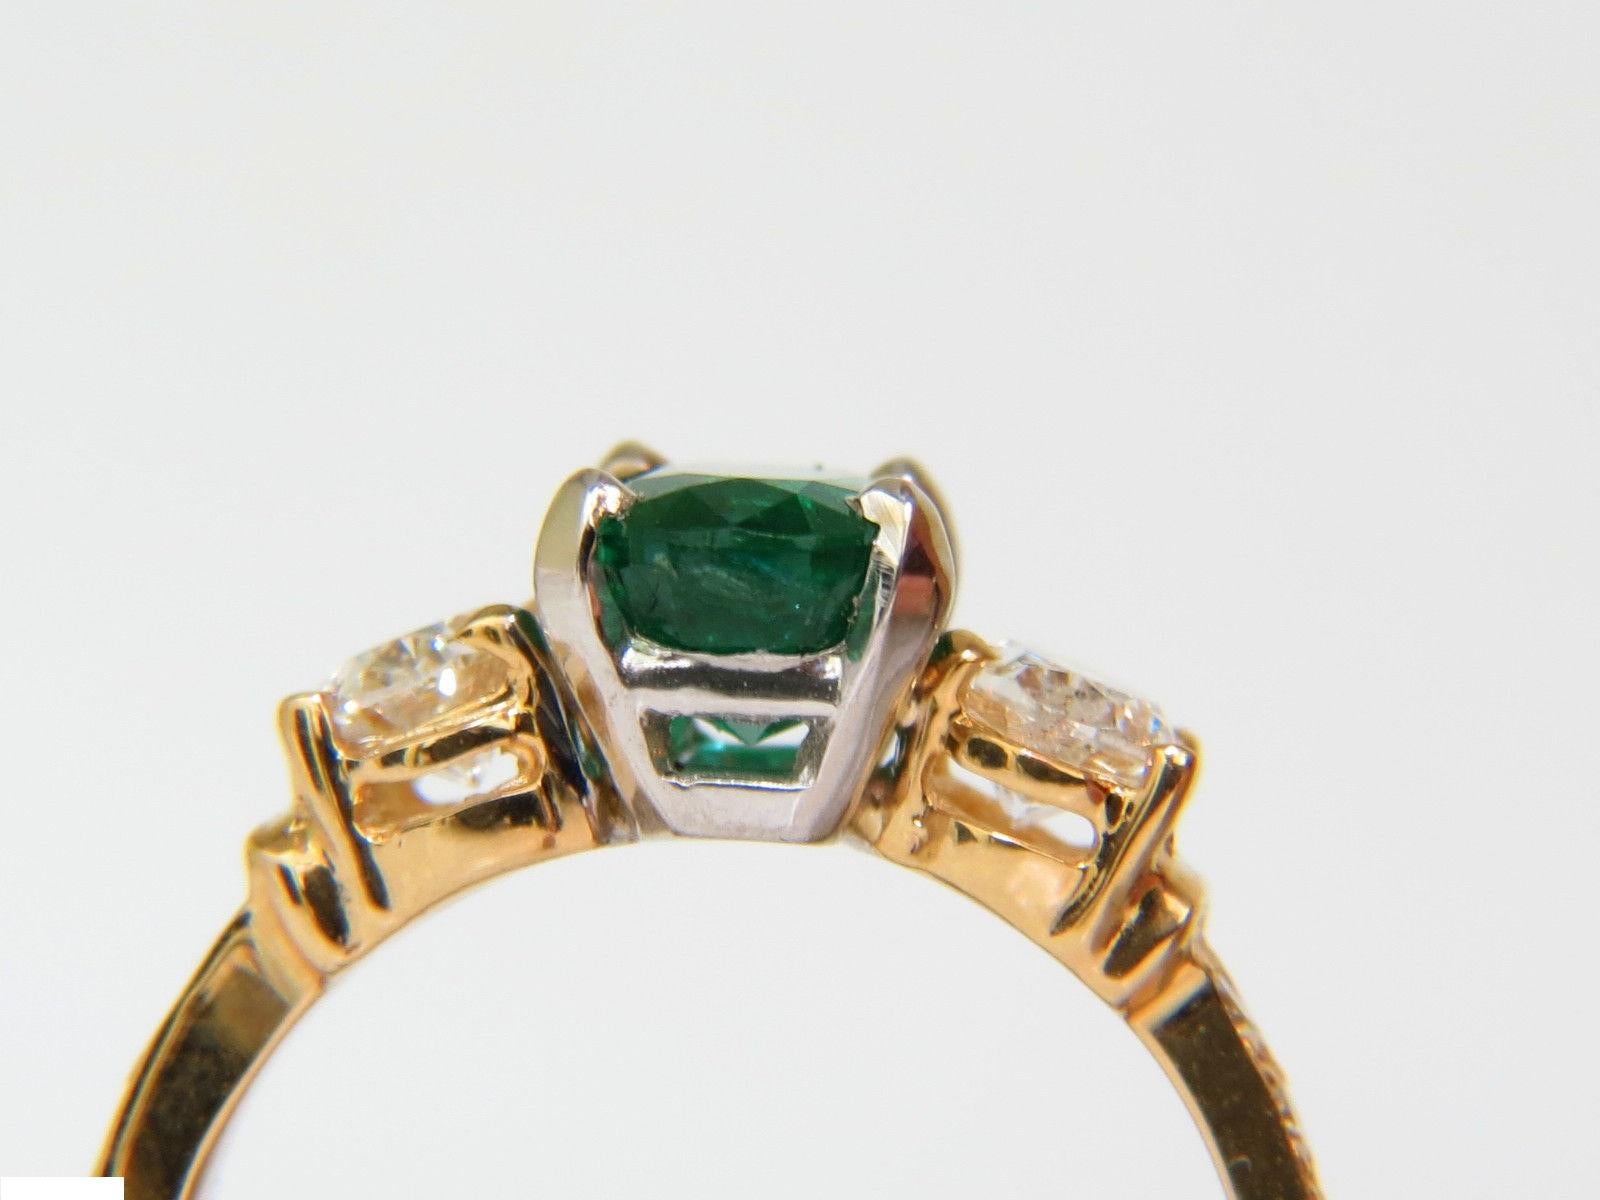 Early European Deco

Three stone classic

1.60ct. Natural Oval emerald

Vivid Green, Excellent Saturation 

Clean clarity / very slightly included

Zambia mining at its best! 

 

1.60ct. diamonds

Includes the weight of 2 ovals and side round pave